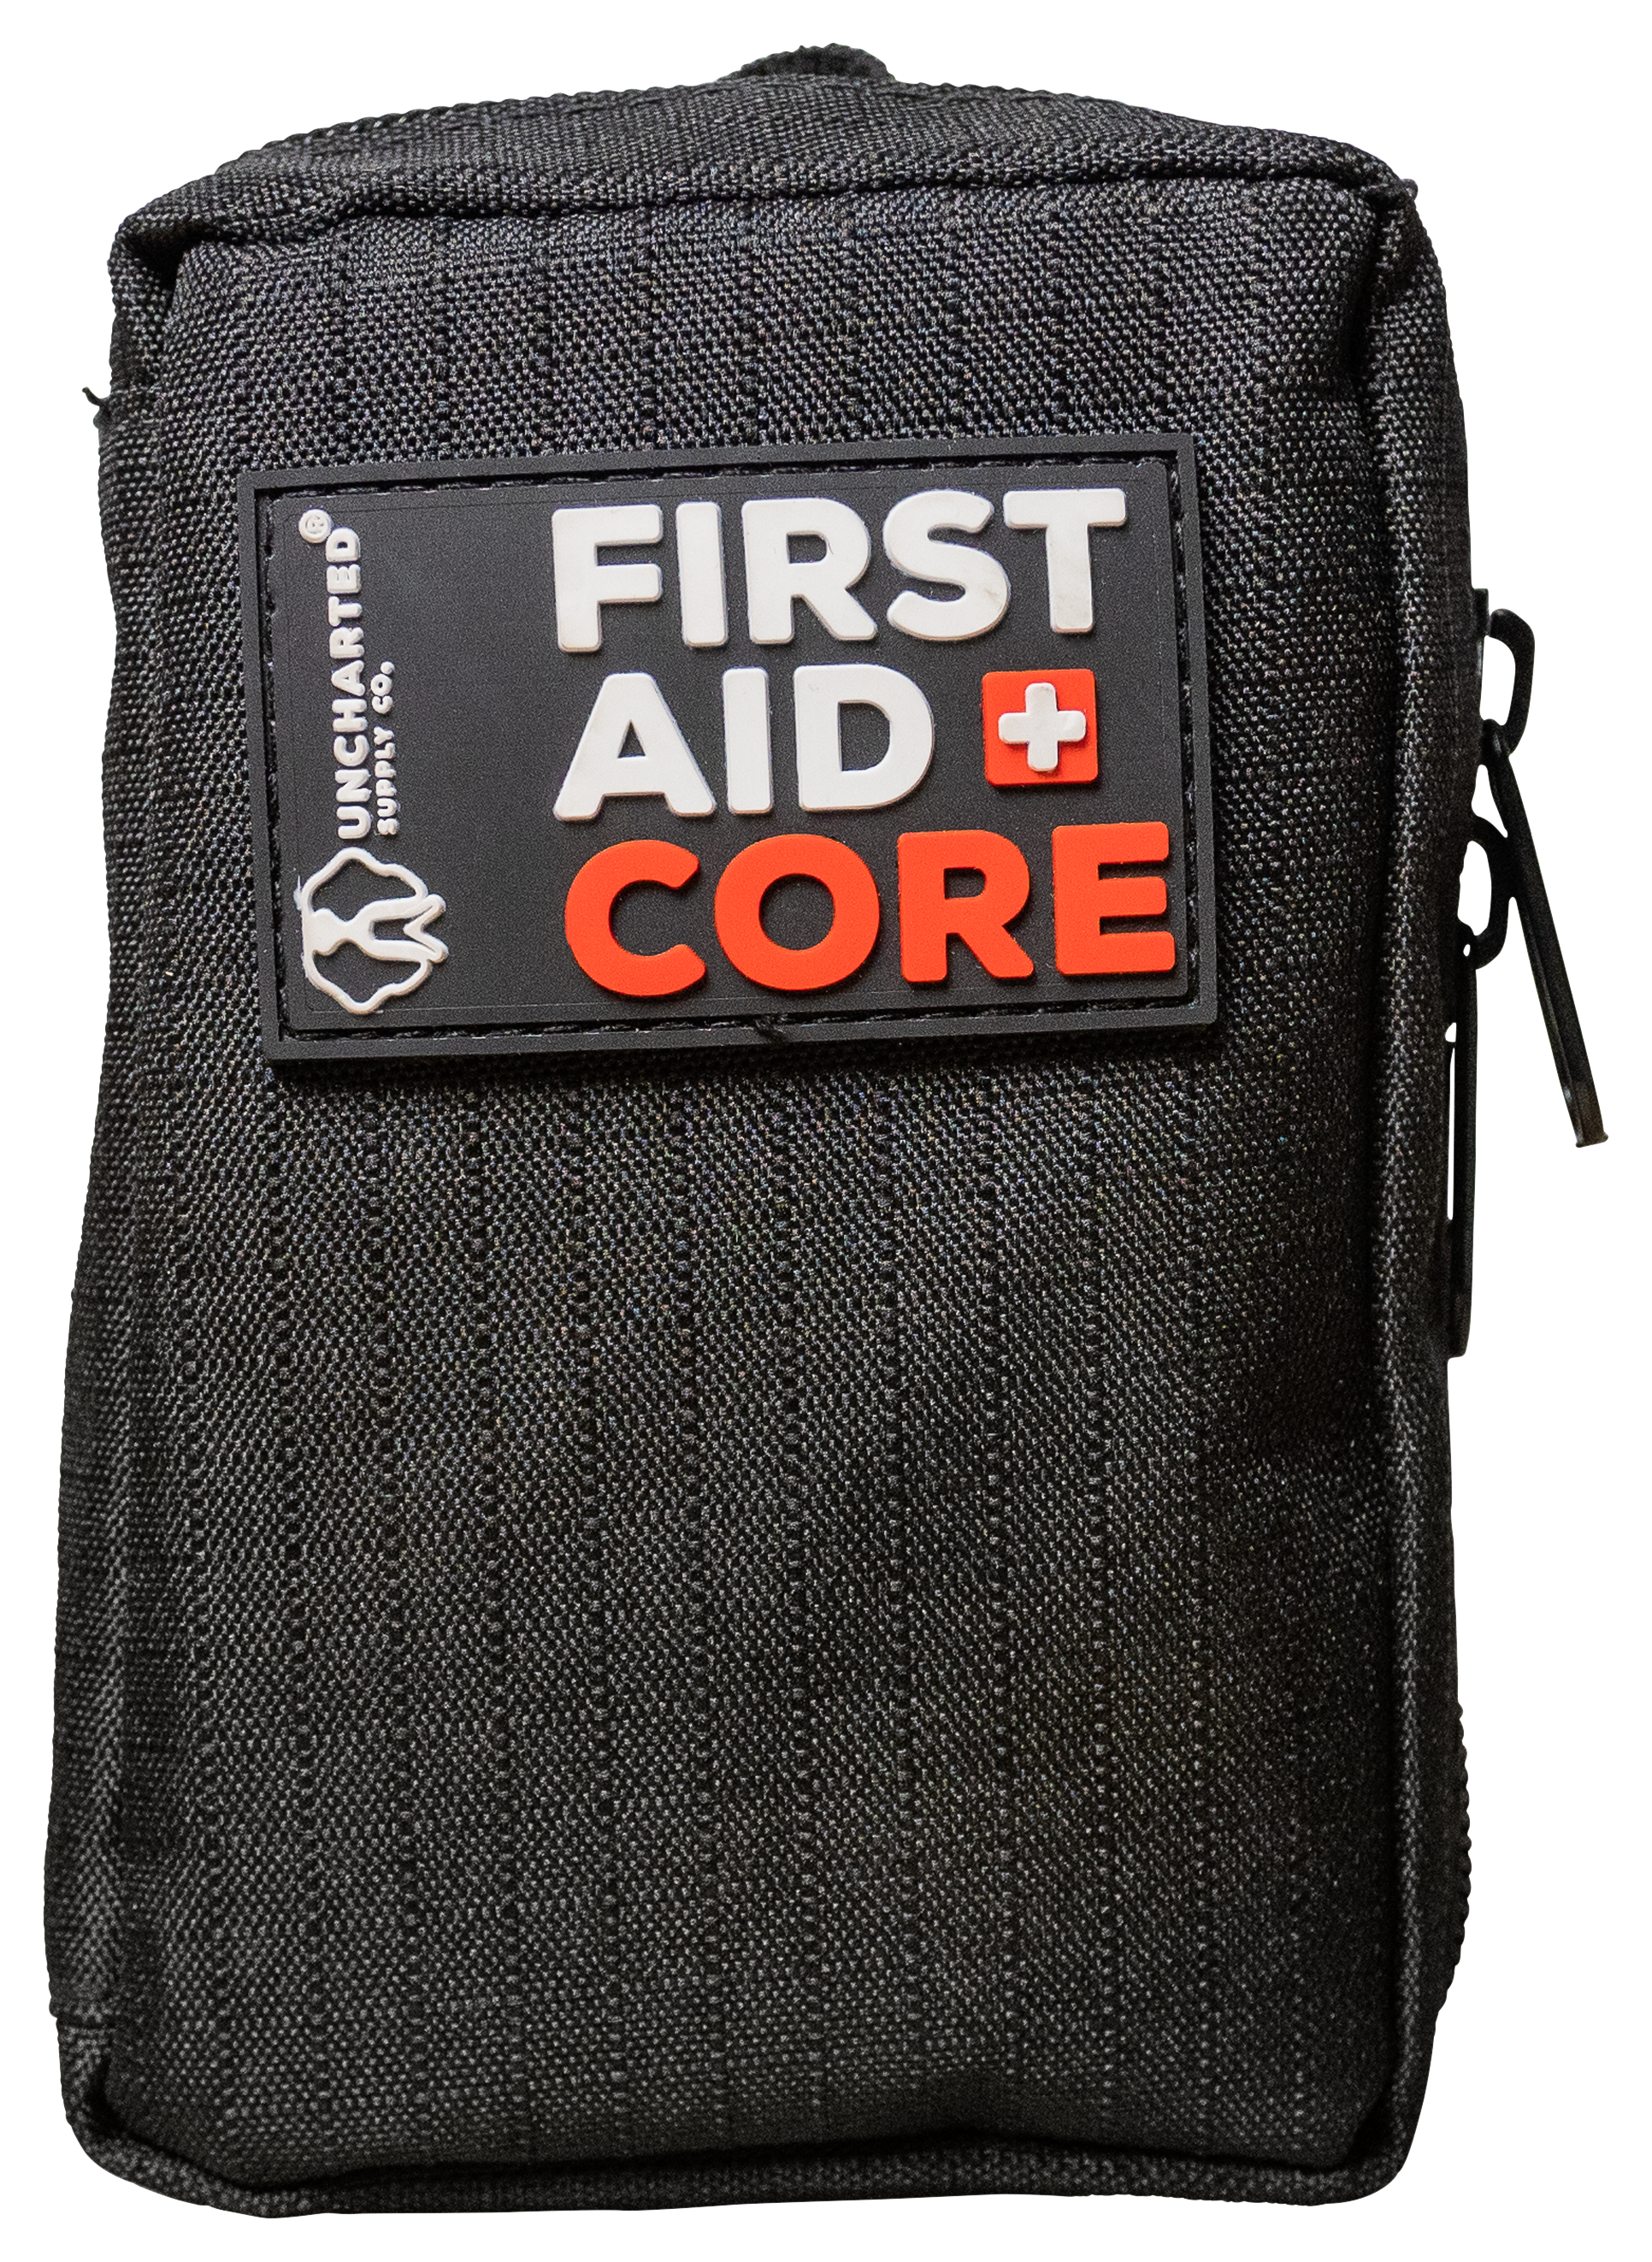 Uncharted Supply Co. First Aid Core Kit